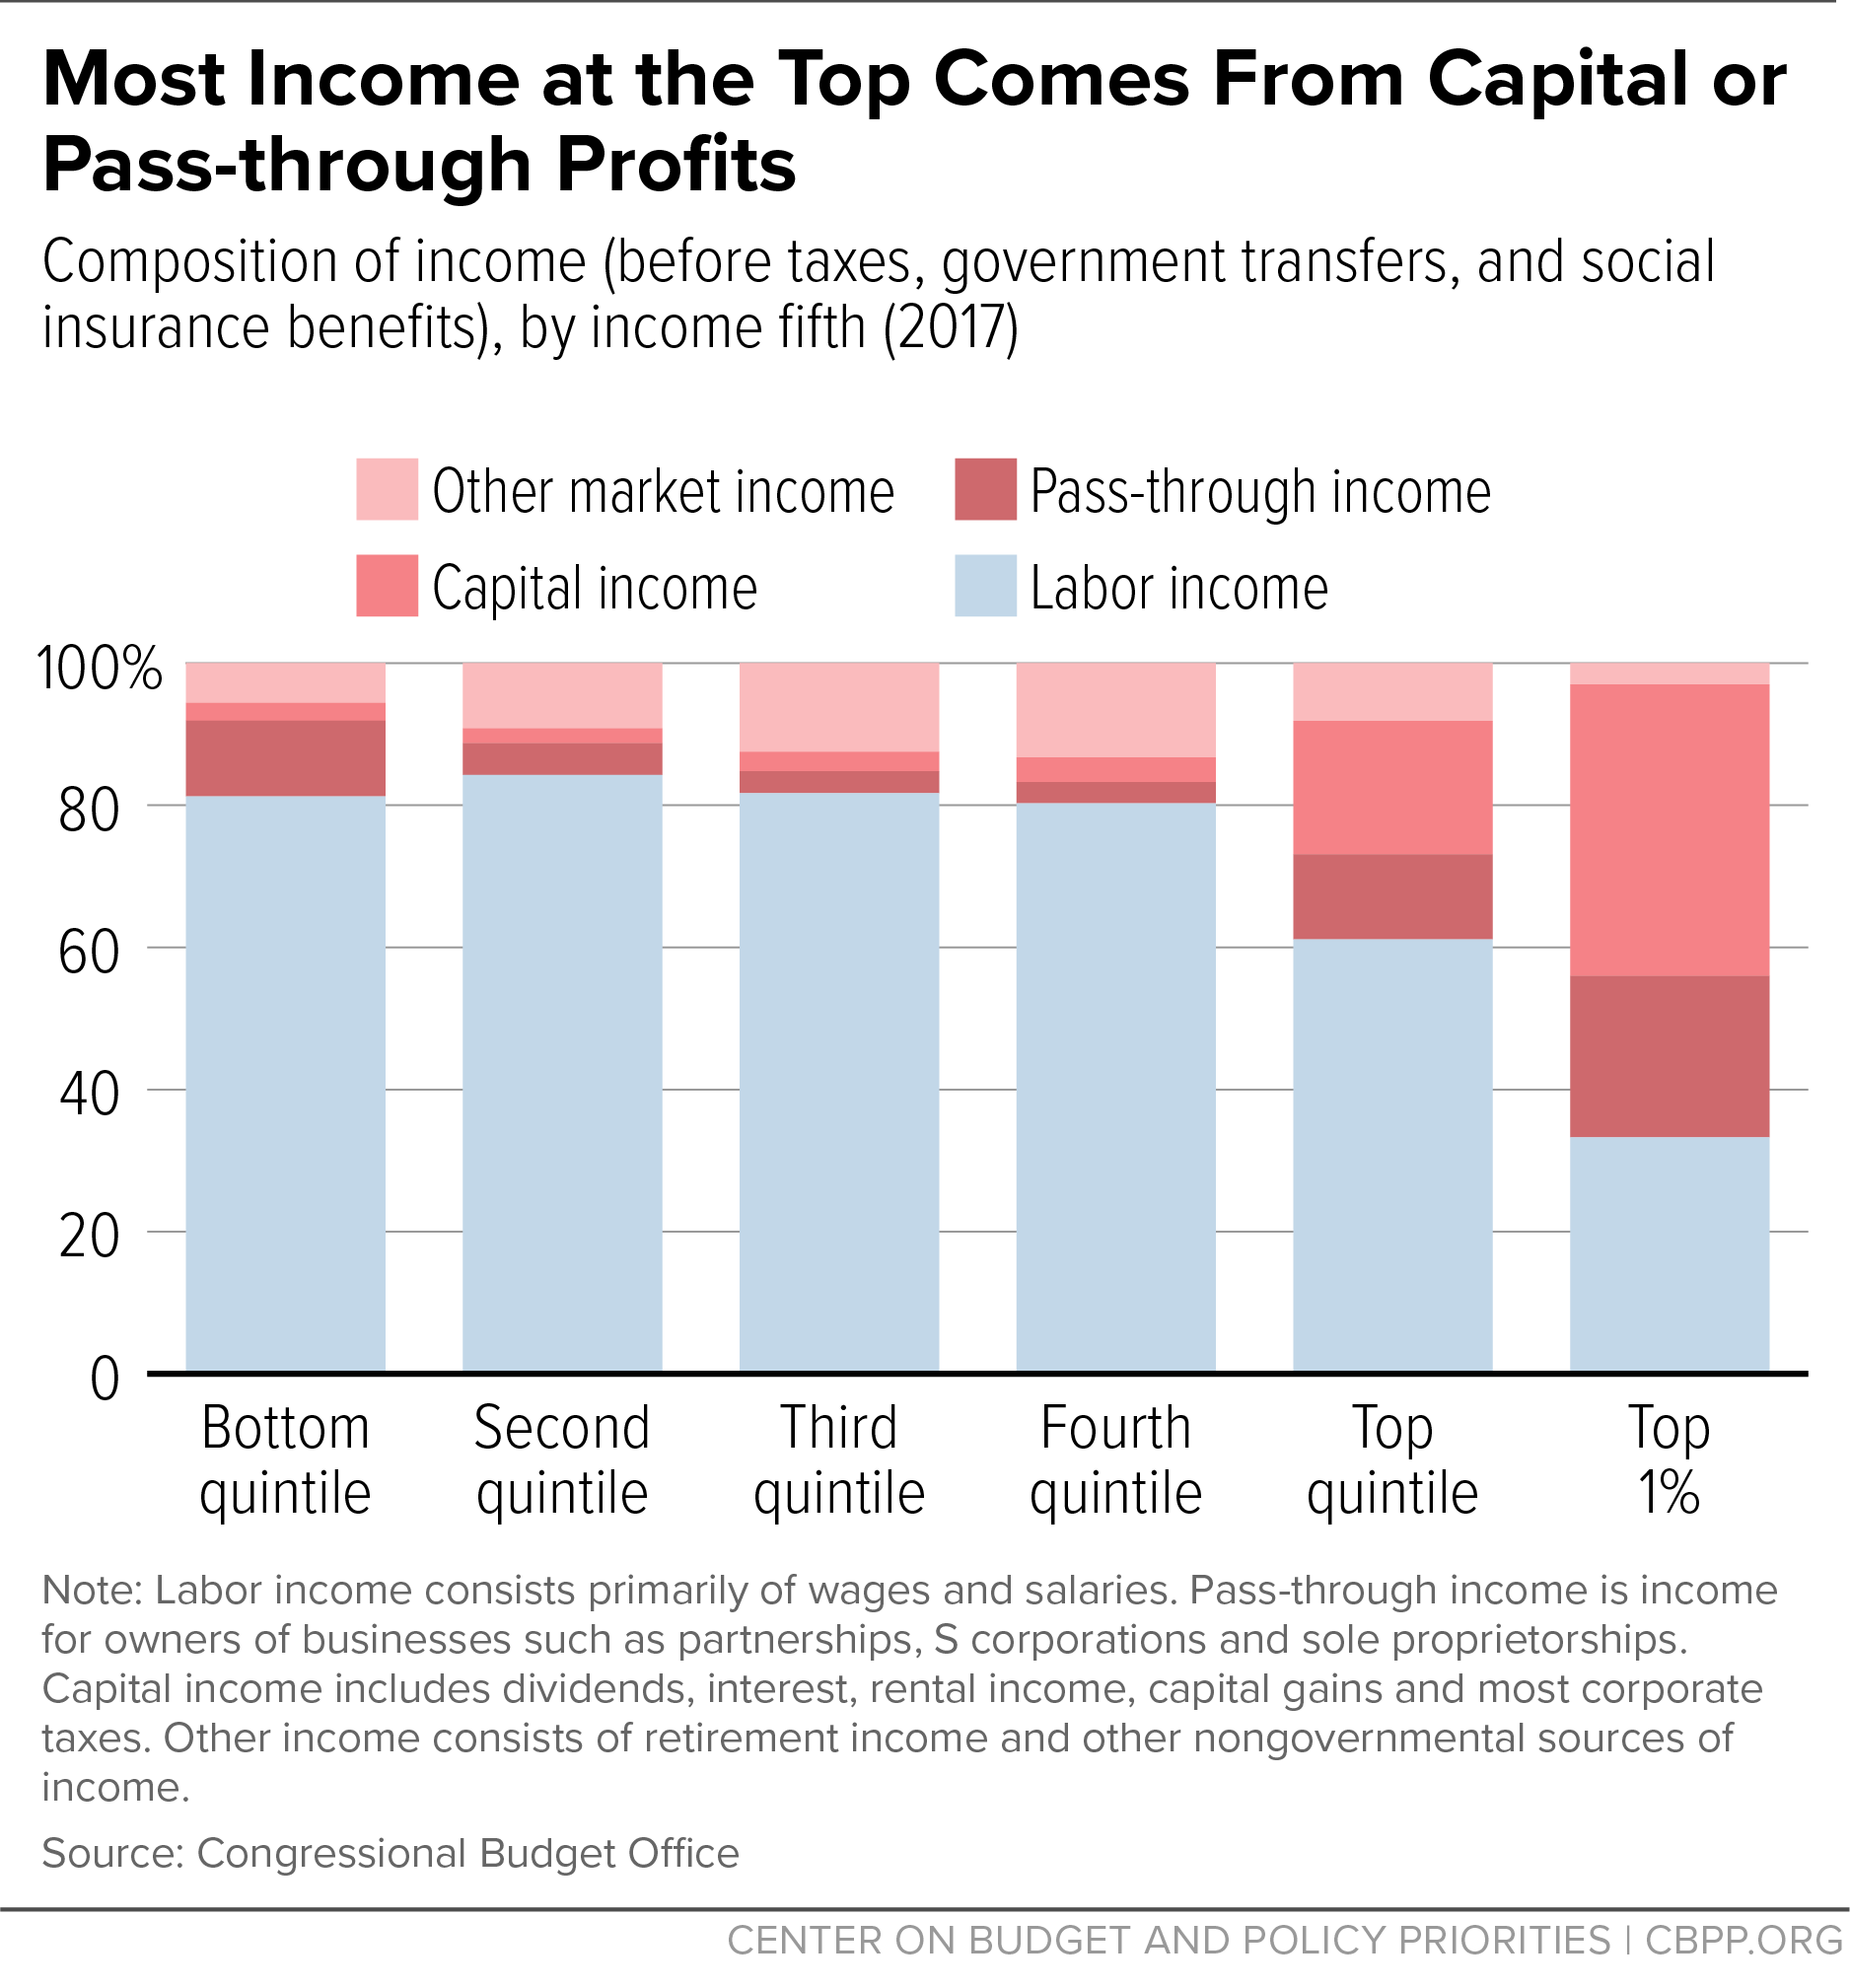 Most Income at the Top Comes From Capital or Pass-through Profits